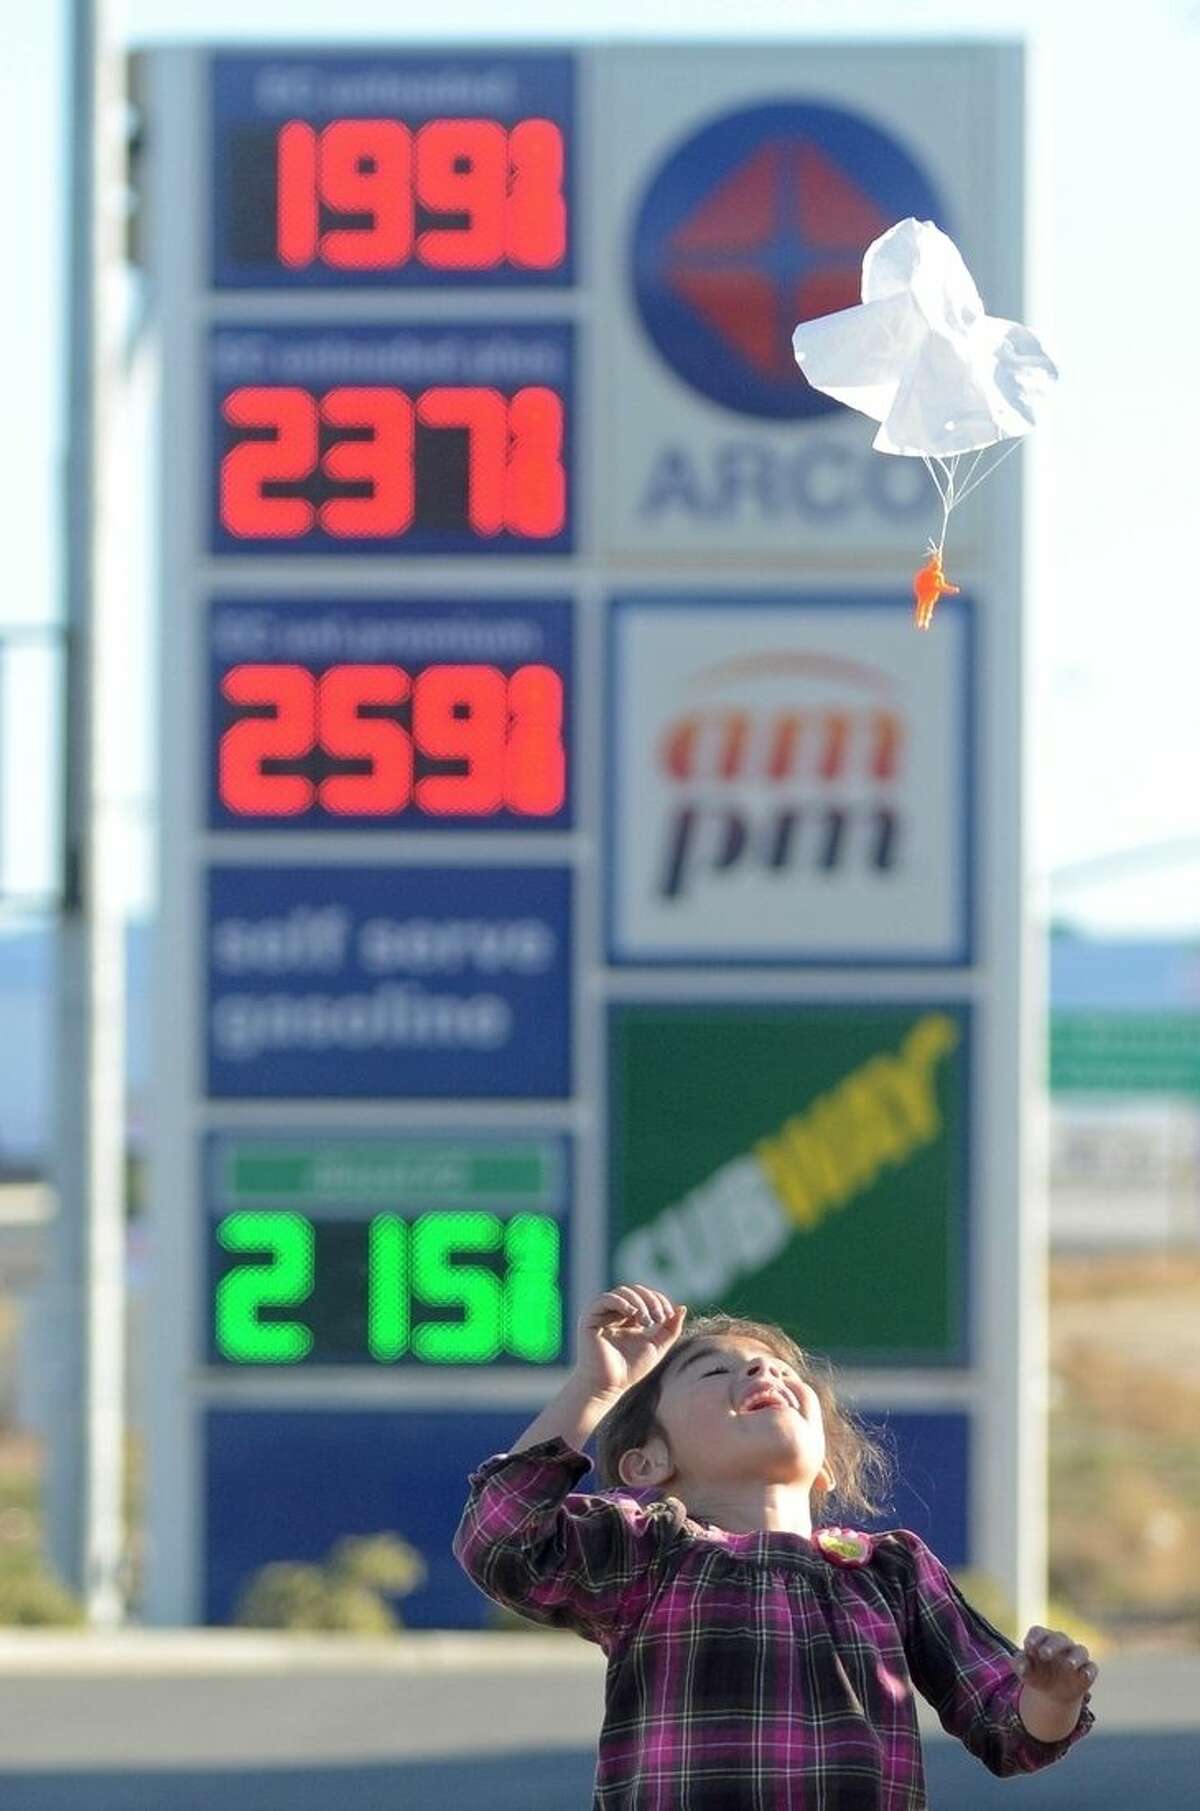 FILE - In this Wednesday, Feb. 24, 2016, file photo, Joanna Alvarez plays with a toy parachute man at an Arco gas station parking lot in Oak Hills, Calif. Gasoline prices are expected to keep rising until summer but remain far cheaper than recent years, due to the worldwide glut of oil. (David Pardo/Victor Valley Daily Press via AP, File)